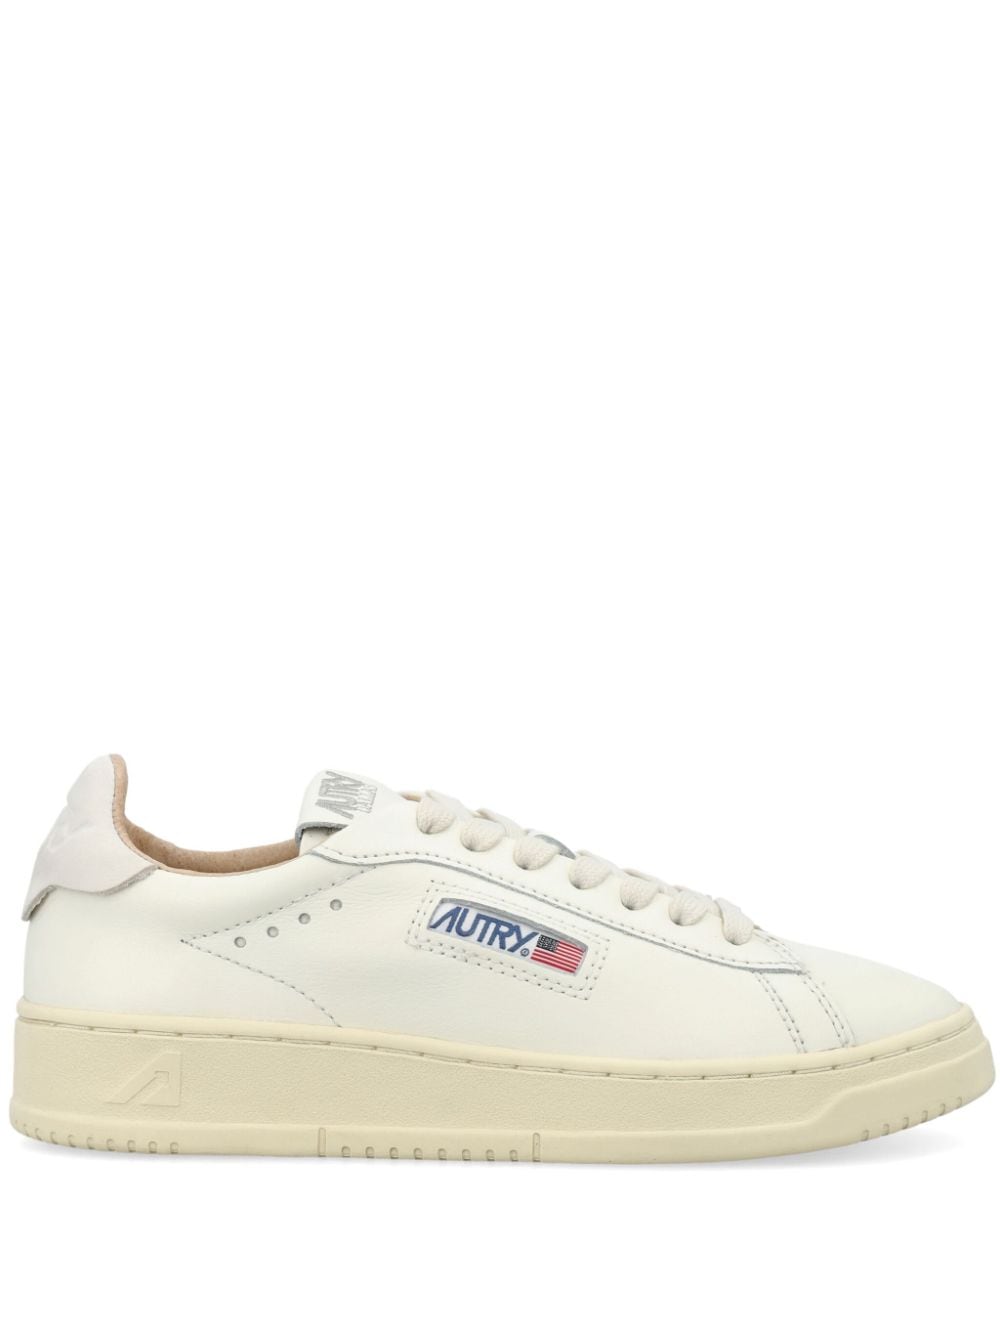 Autry Dallas Low Leather Sneakers In White